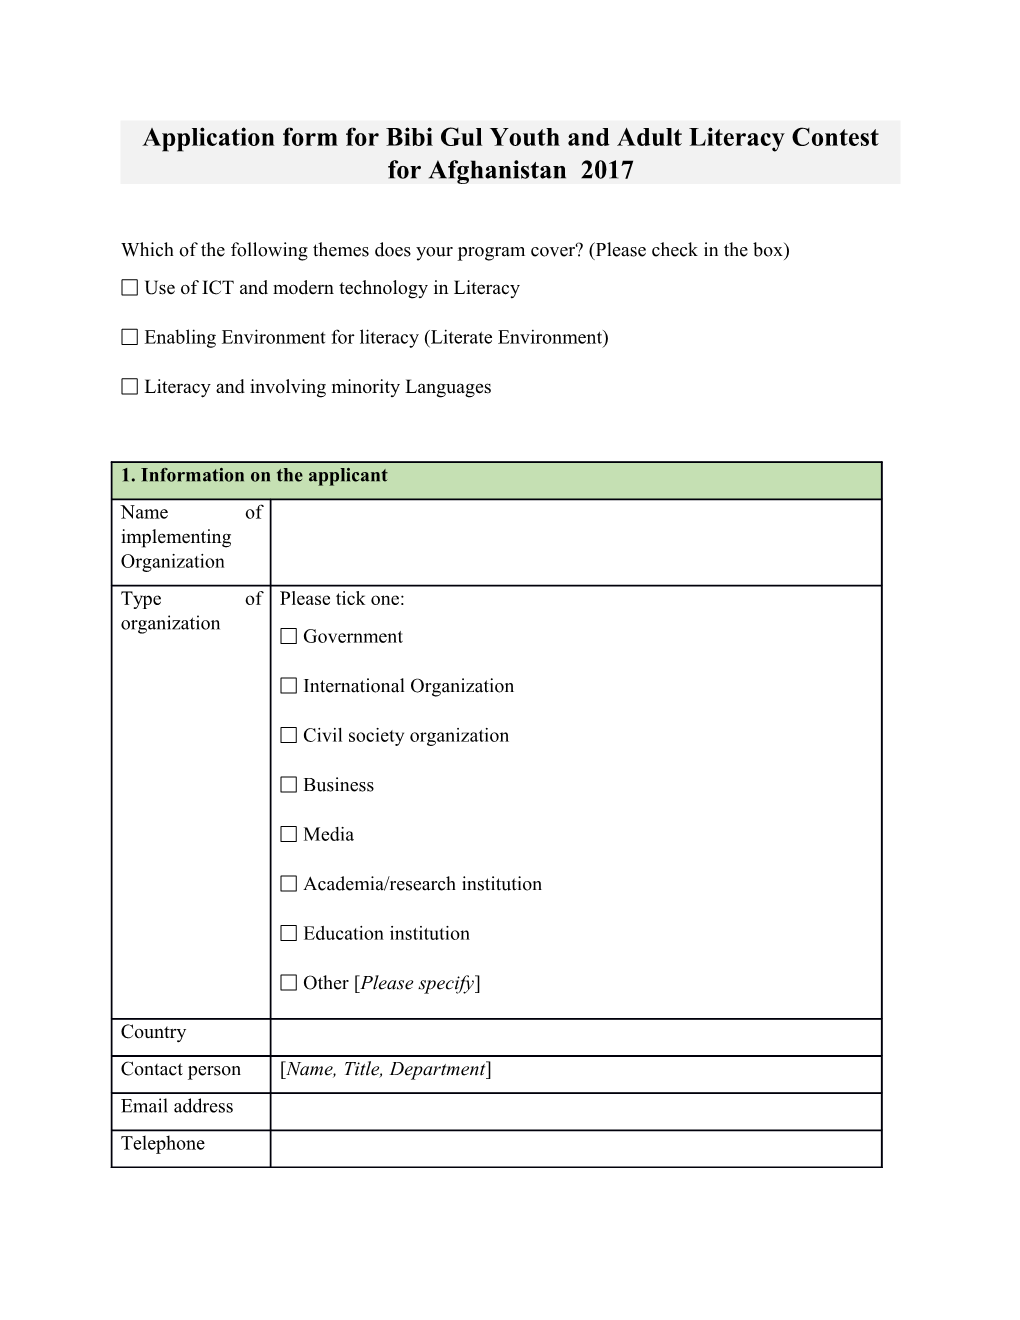 Application Form for Bibi Gul Youth and Adult Literacy Contest for Afghanistan 2017